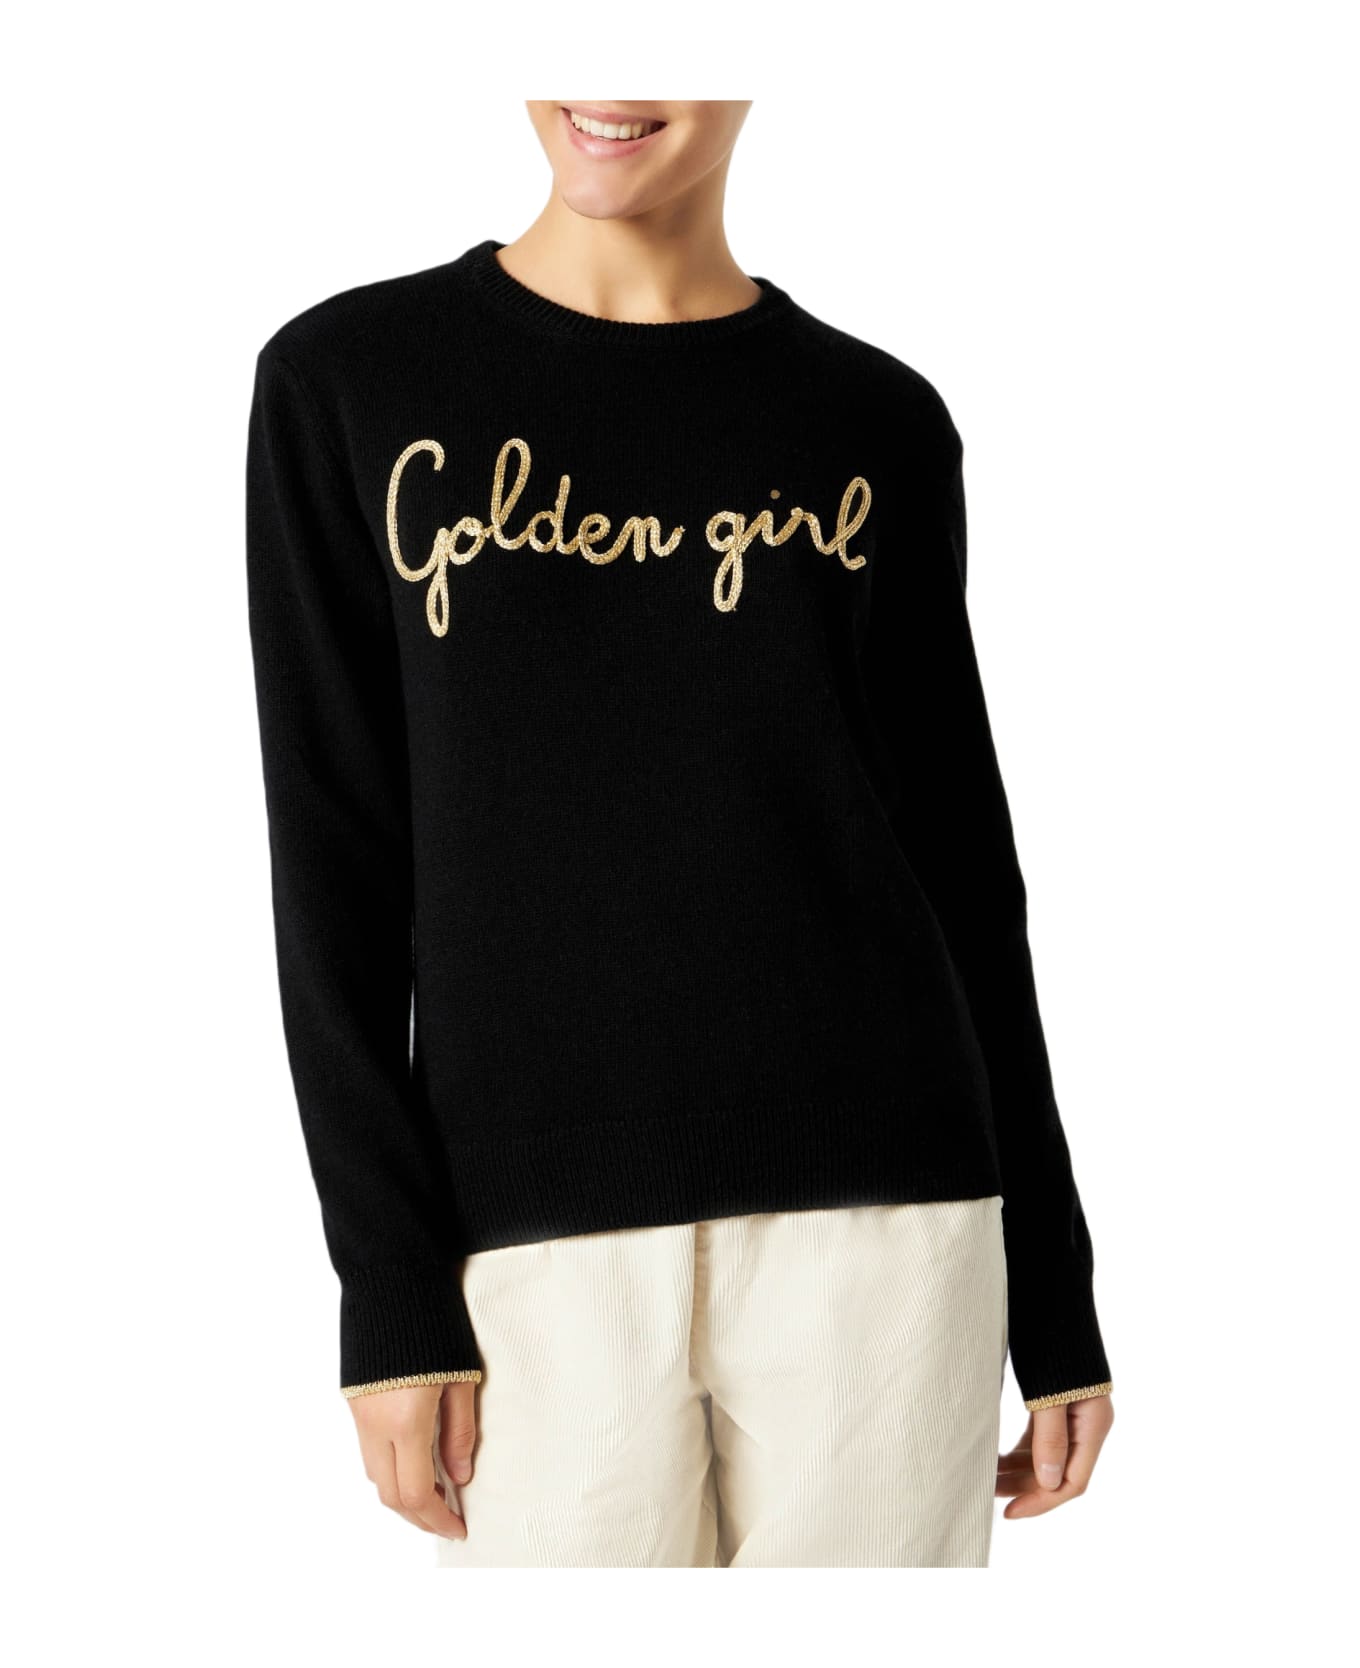 MC2 Saint Barth Woman Sweater With Golden Girl Embroidery